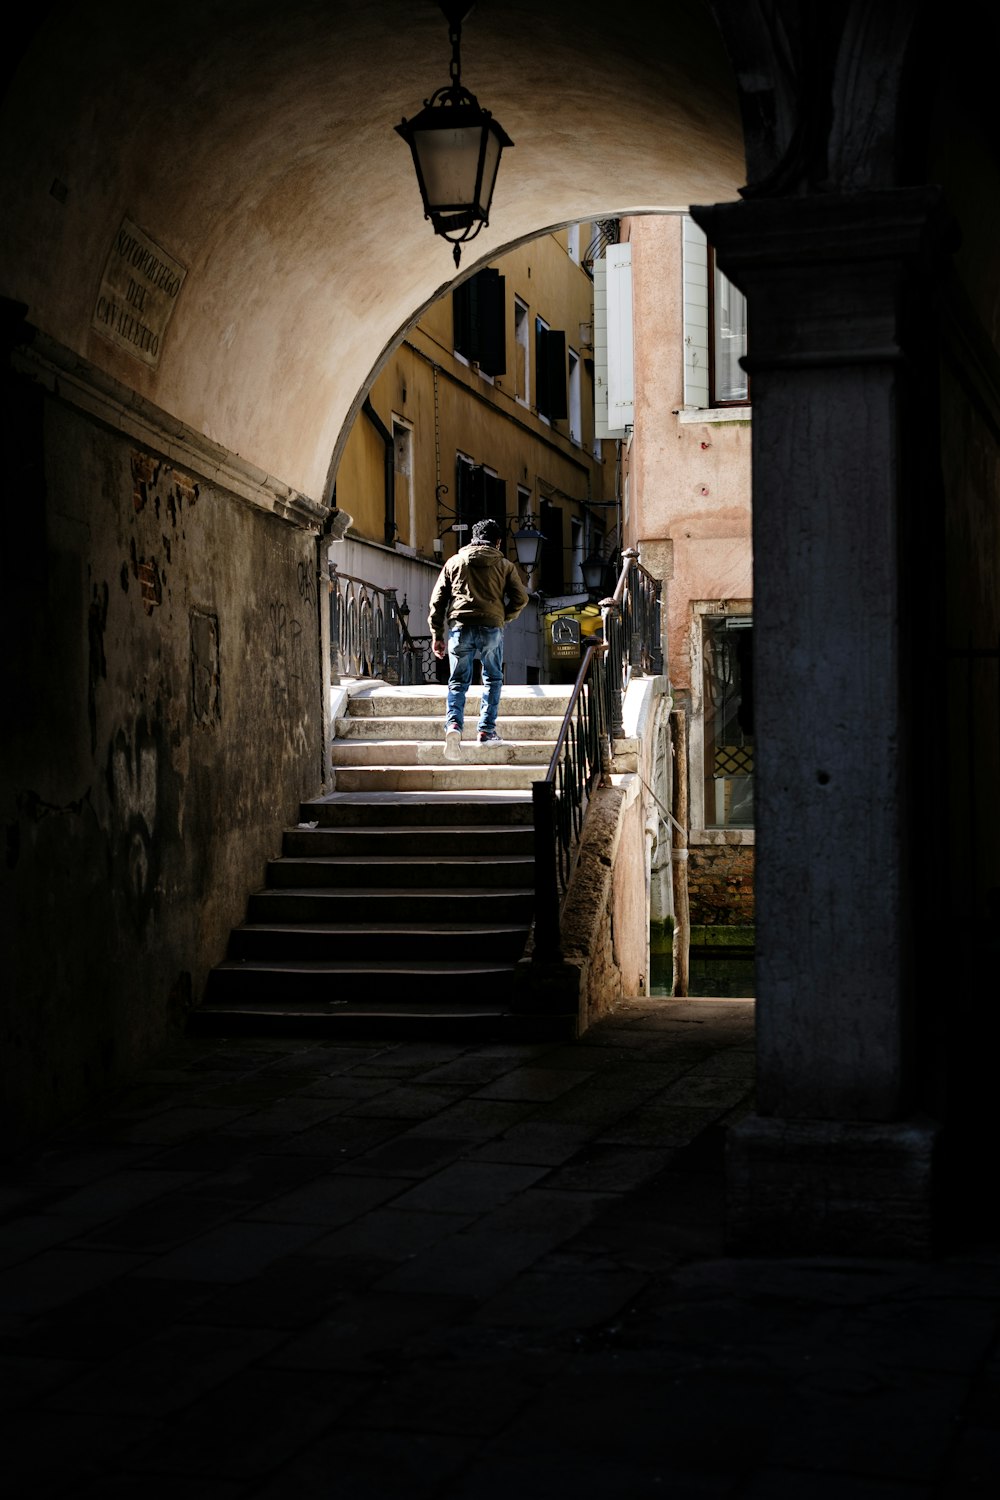 a person walking up a flight of stairs